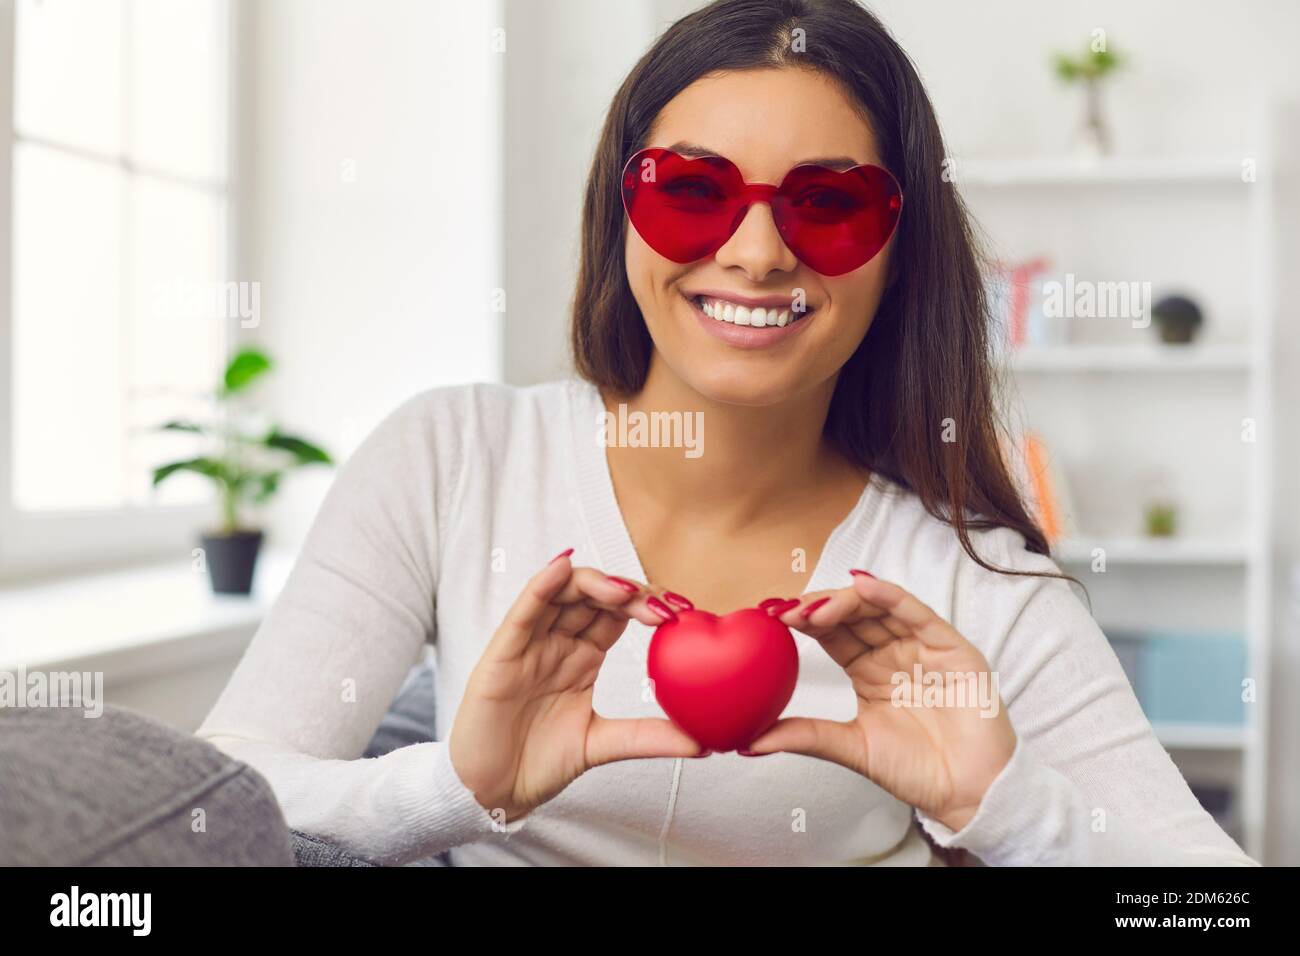 Grateful woman holding a red heart in front of the camera expressing gratitude to her audience. Stock Photo